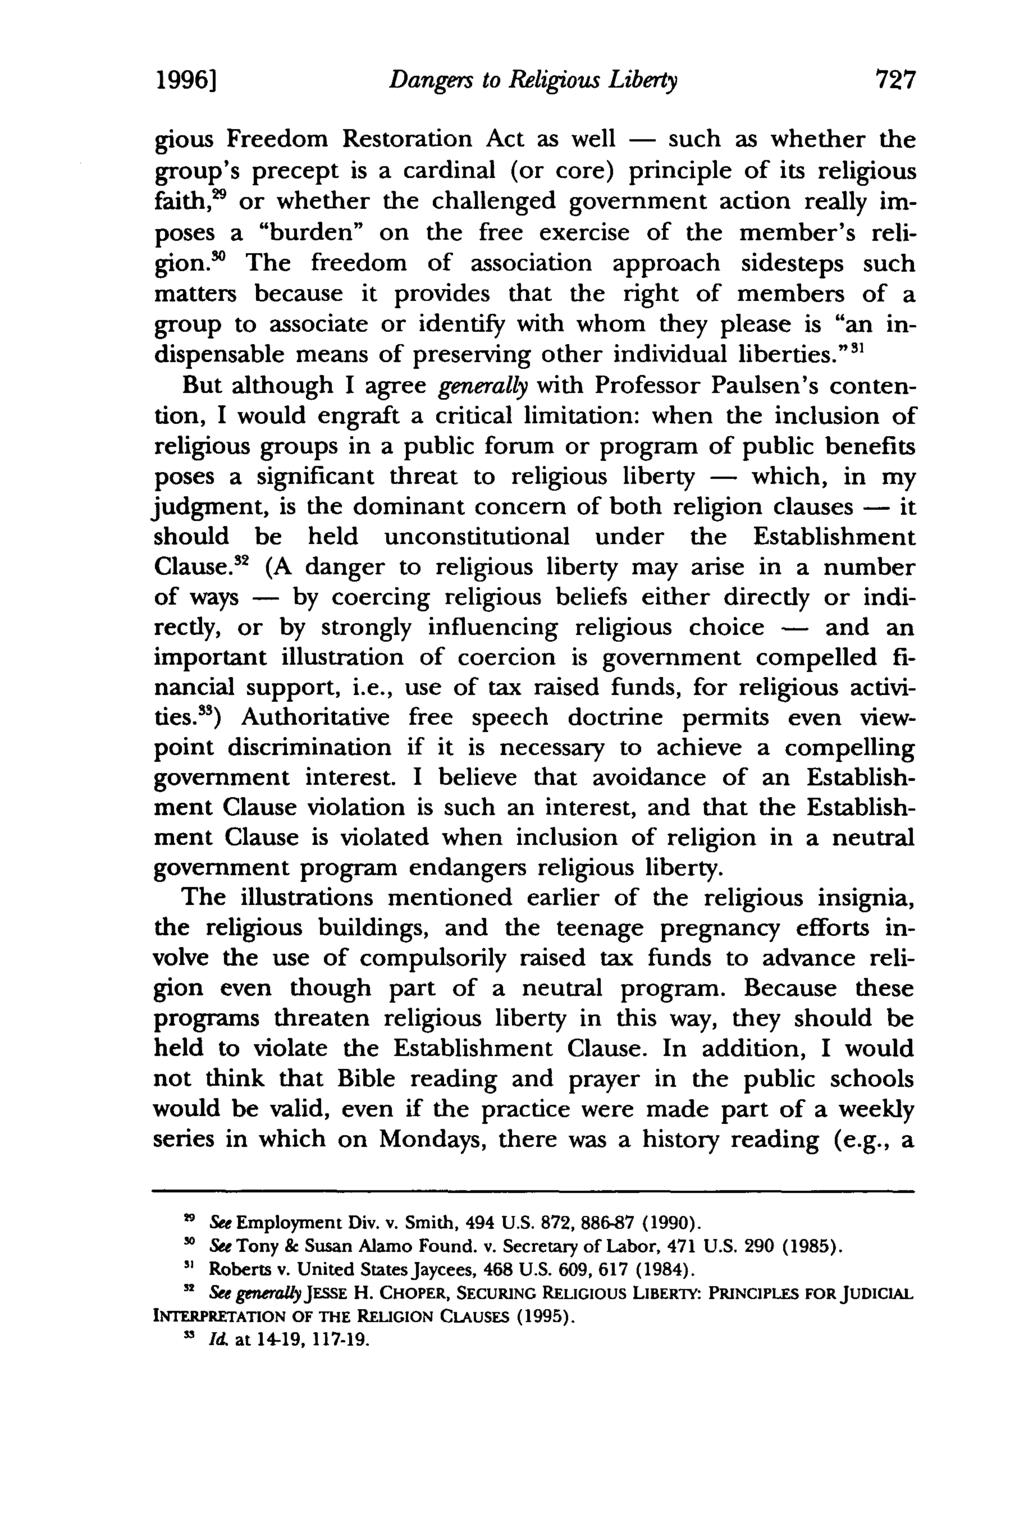 1996] Dangers to Religious Liberty gious Freedom Restoration Act as well - such as whether the group's precept is a cardinal (or core) principle of its religious faith," or whether the challenged